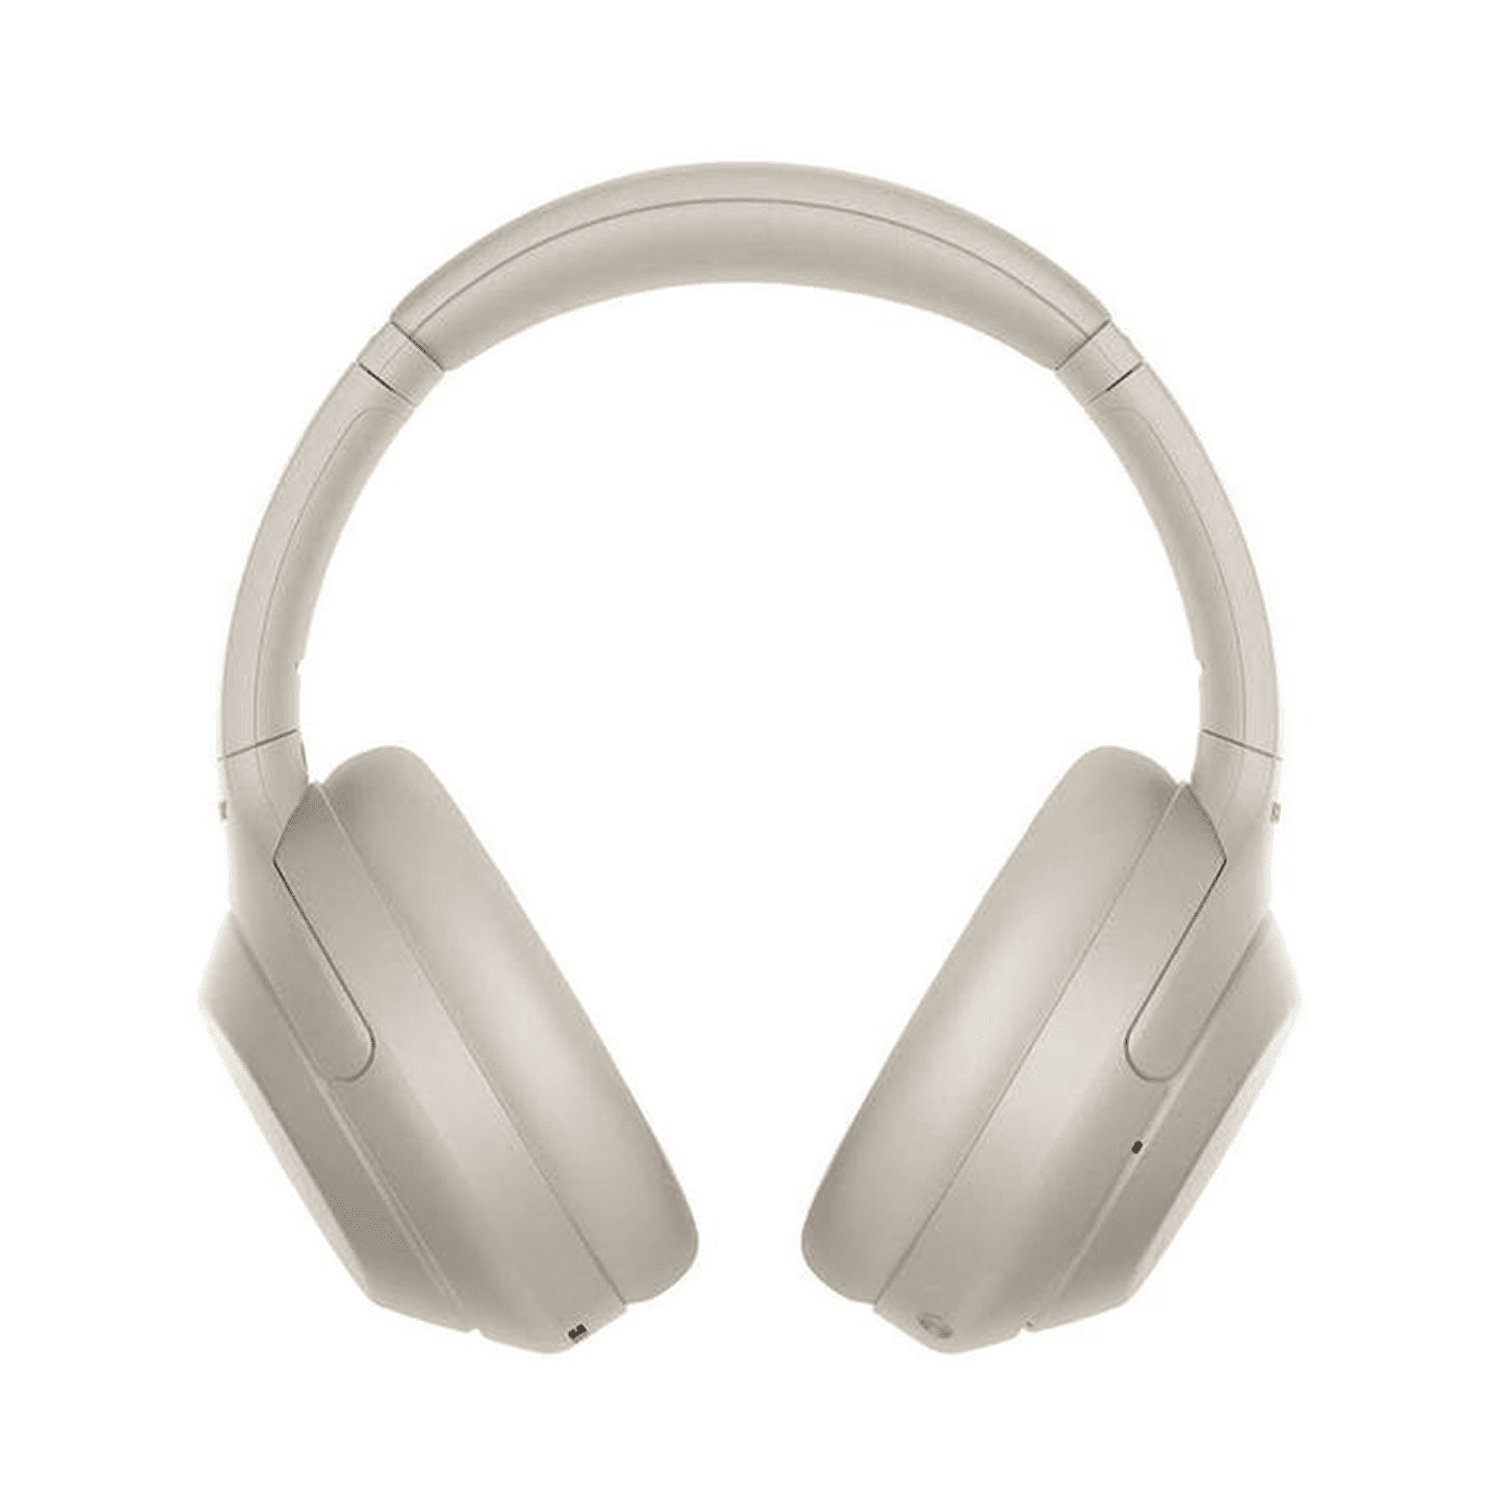 Sony Wireless Noise Cancelling Headphones WH-1000XM4 - Silver